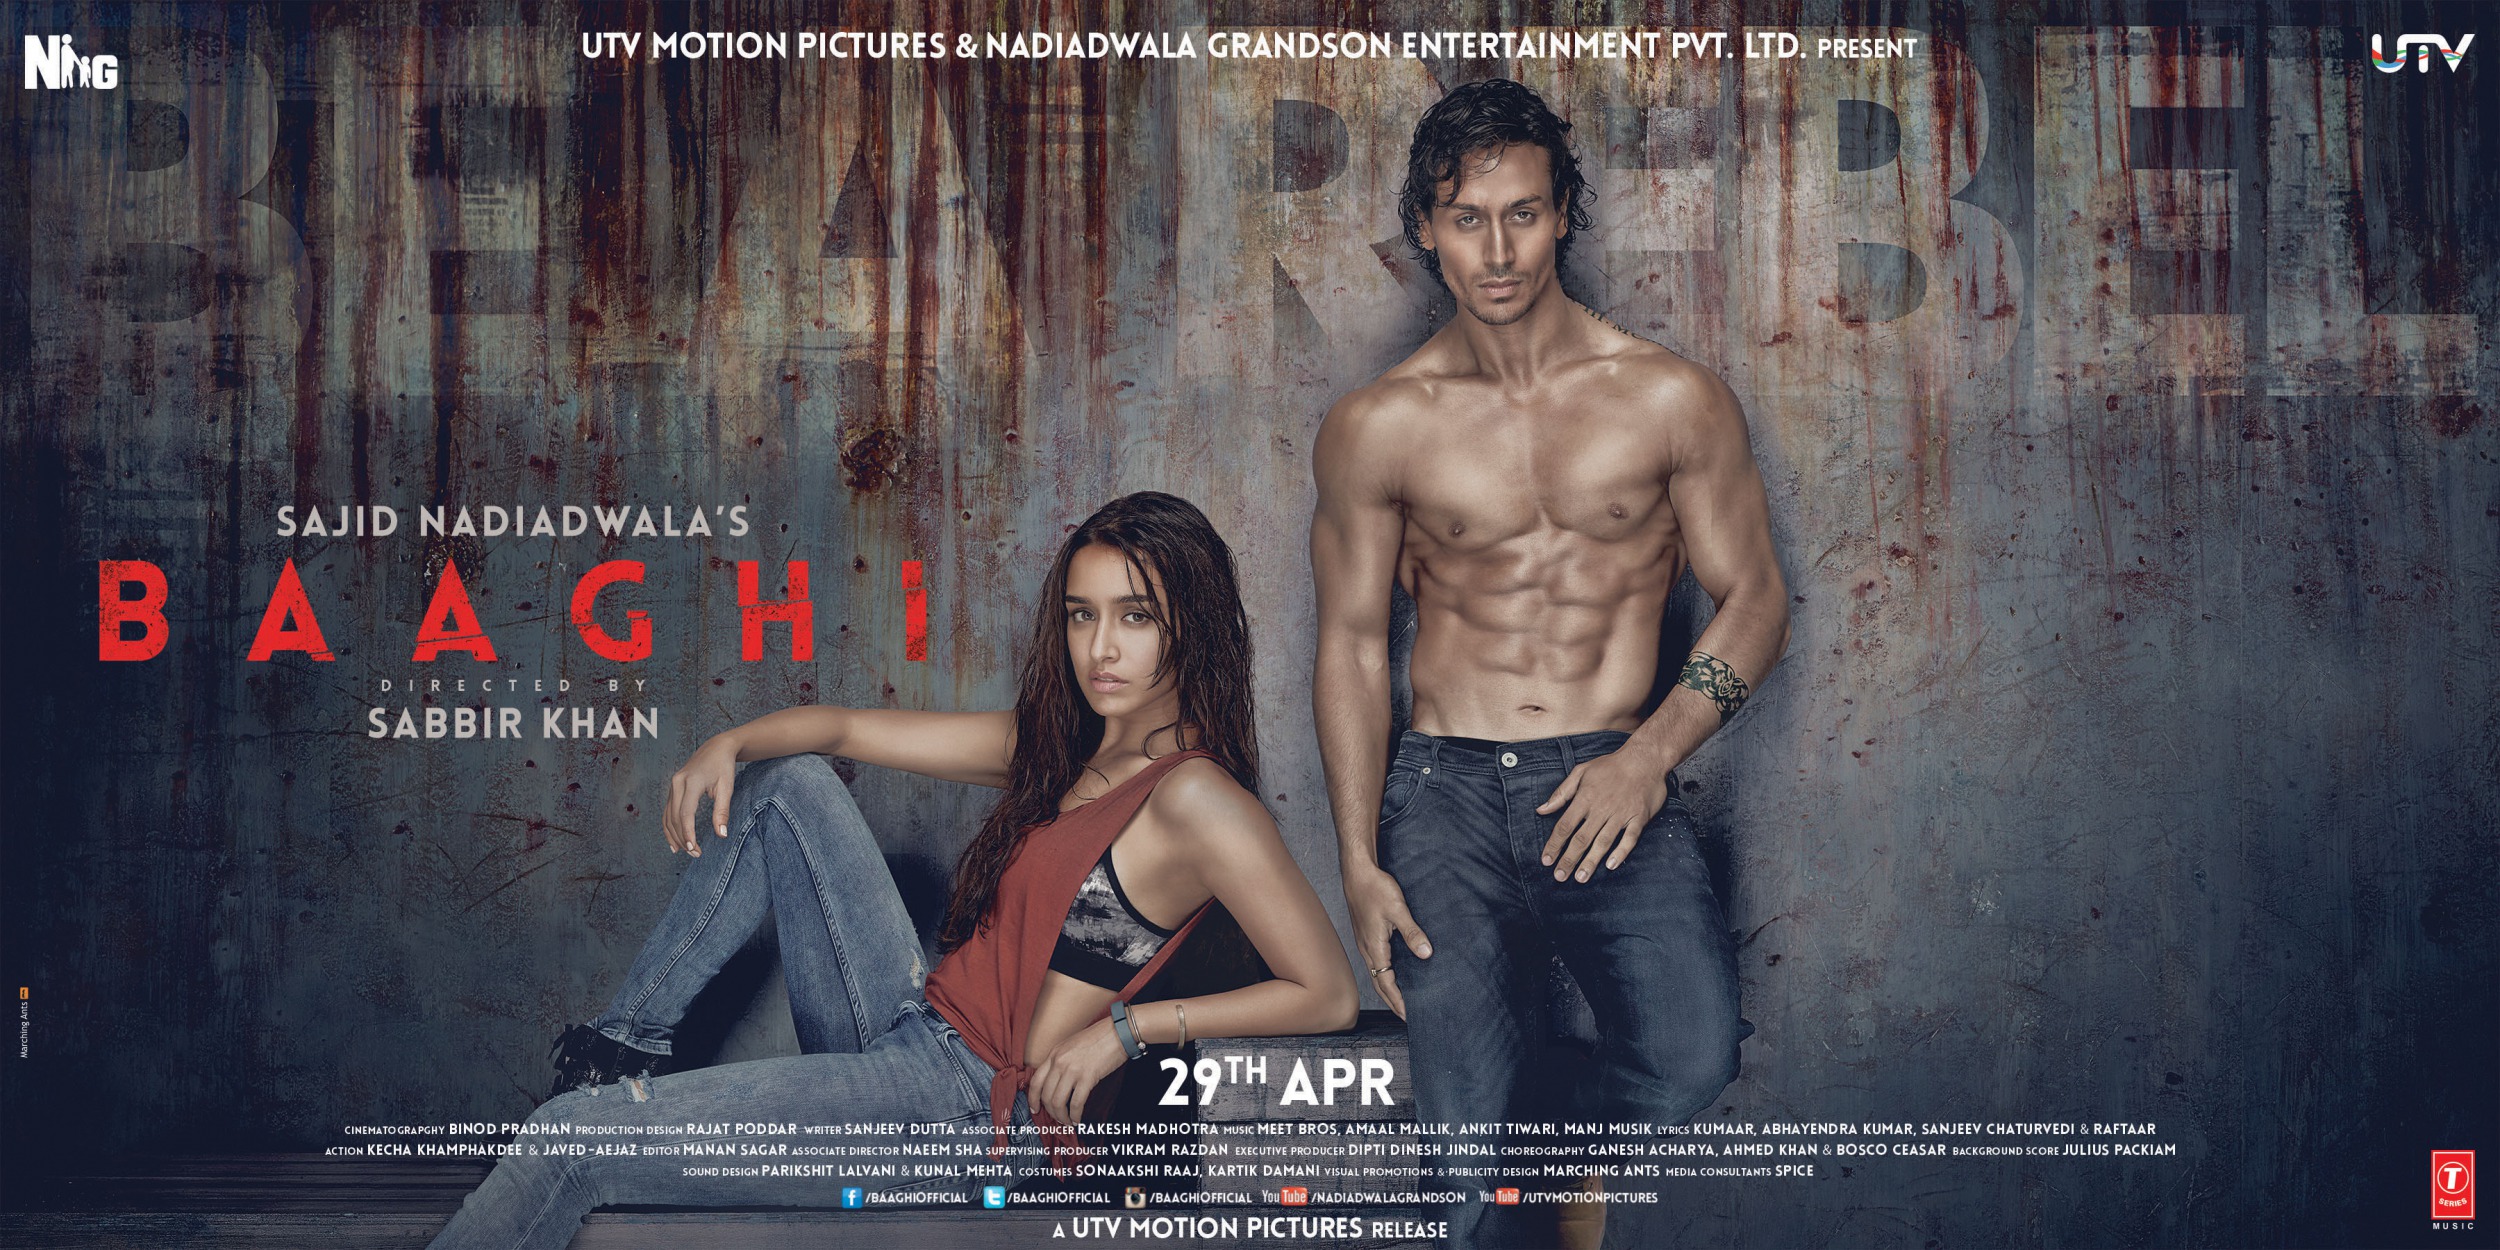 Mega Sized Movie Poster Image for Baaghi (#5 of 7)